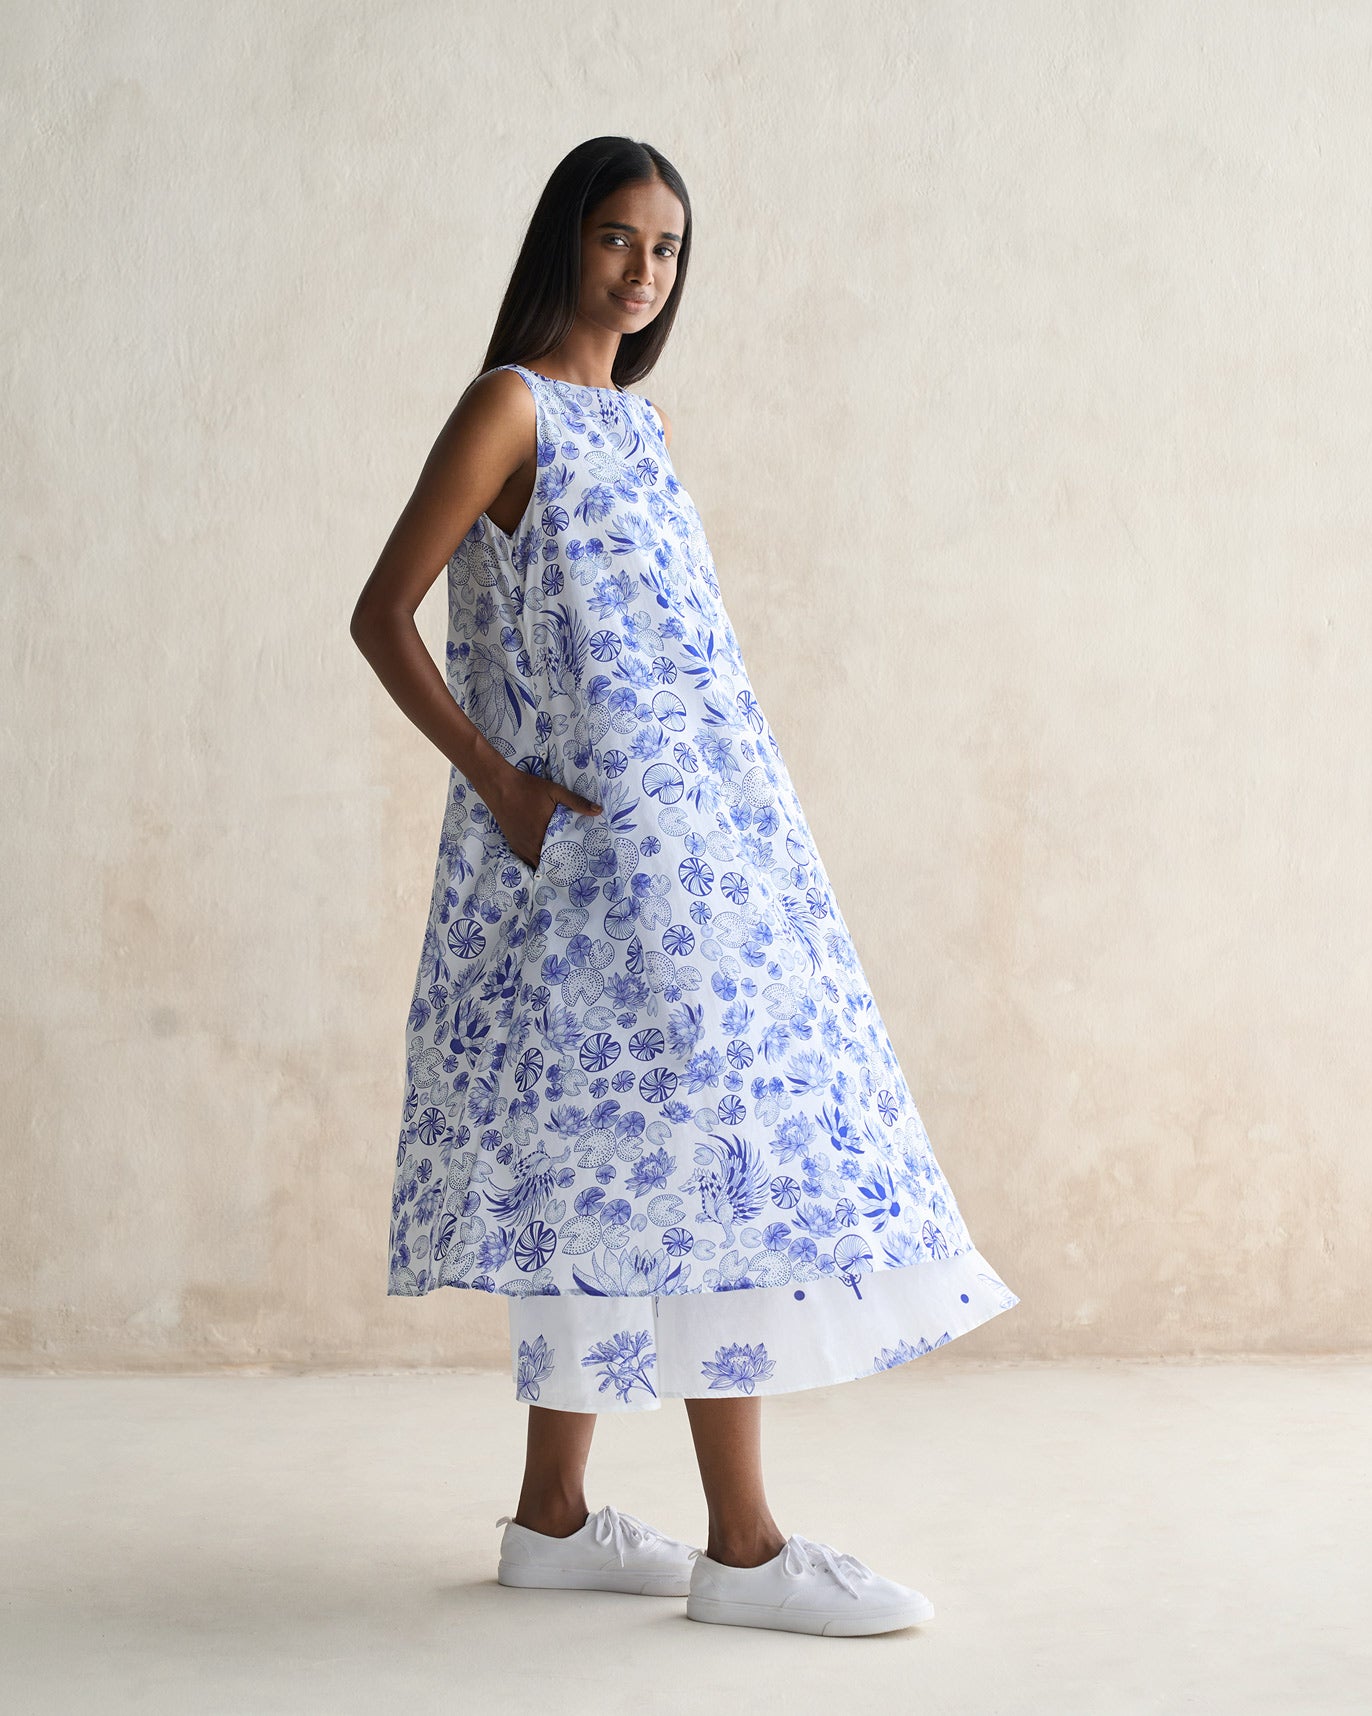 Double Layer Dress - White & Blue